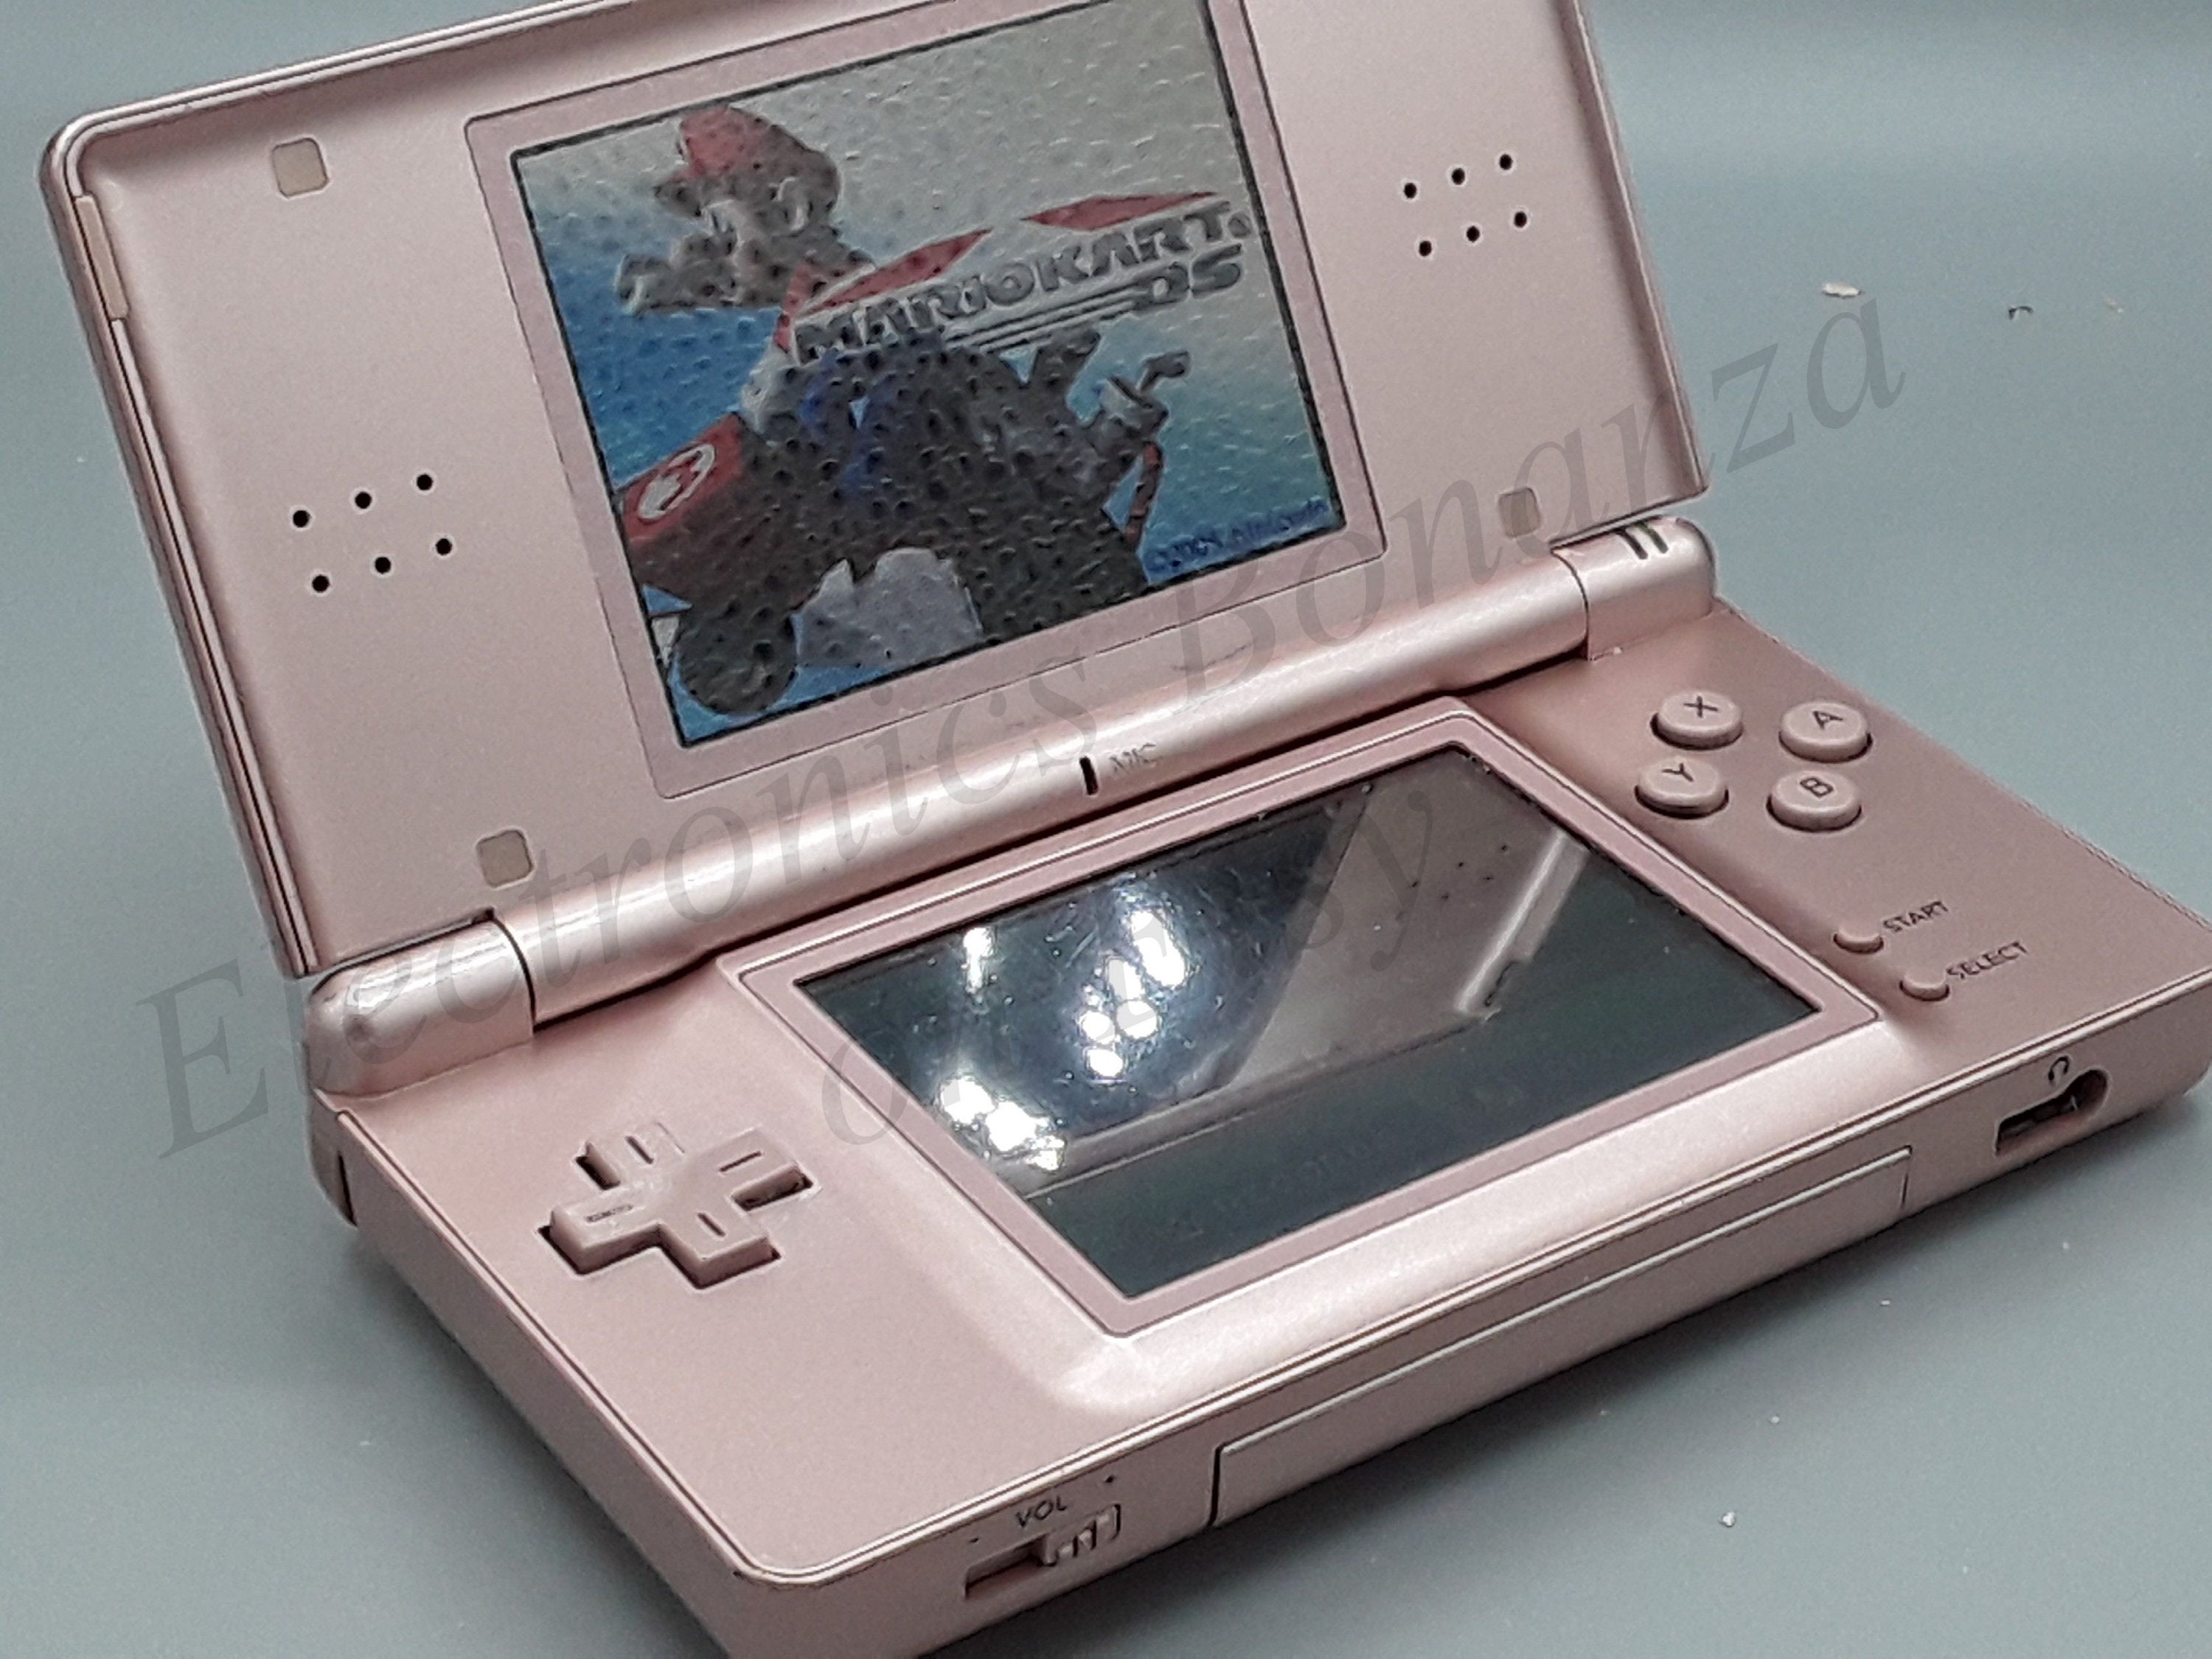 Nintendo DS Lite in Rose Gold - Etsy Canada